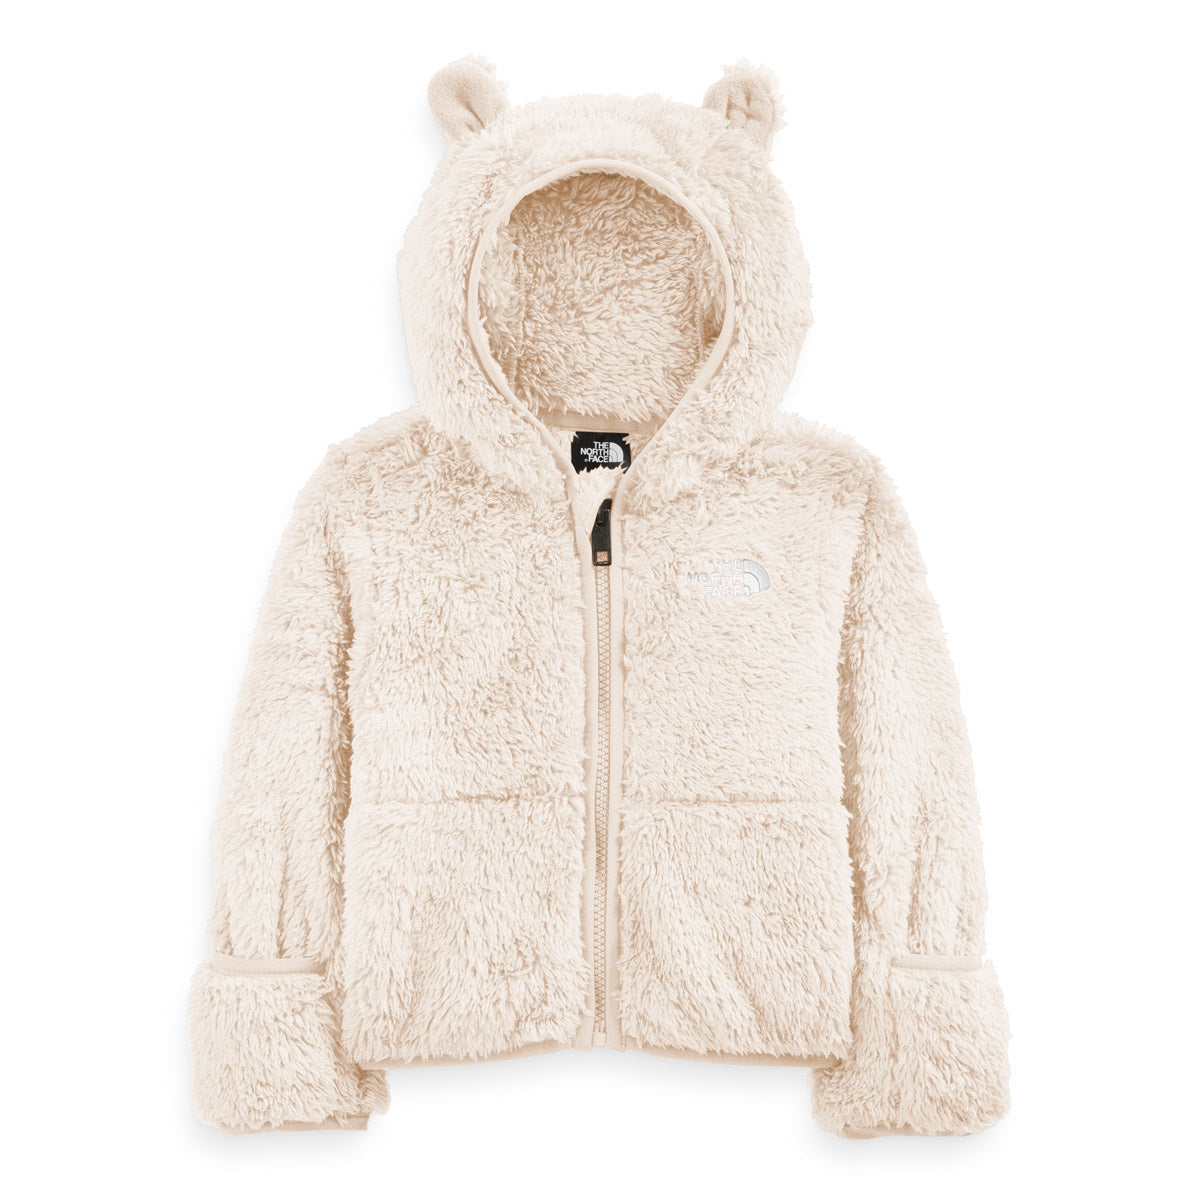  THE NORTH FACE Baby Bear Full Zip Hoodie, Atomizer